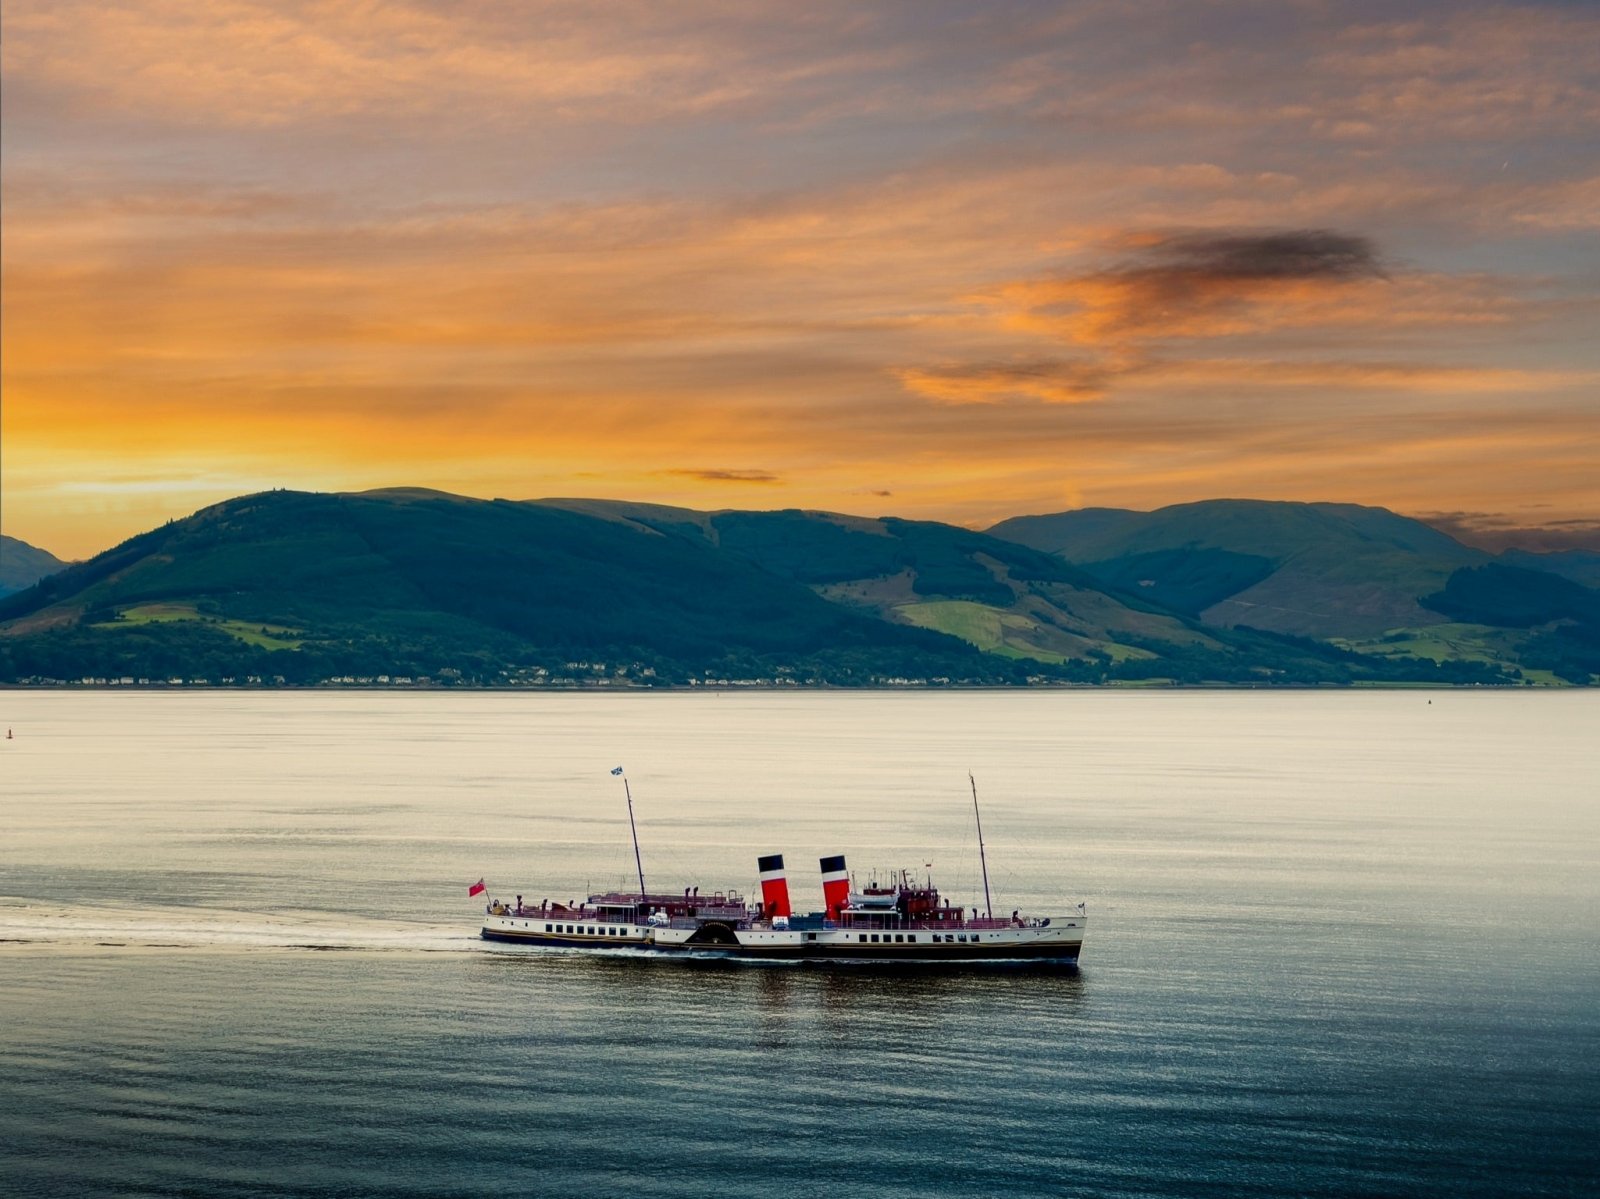 Heading Home Scottish Landscape Photography-Scottish Landscape Photography-River Clyde Art Gallery-Paintings, Prints, Homeware, Art Gifts From Scotland By Scottish Artist Kevin Hunter